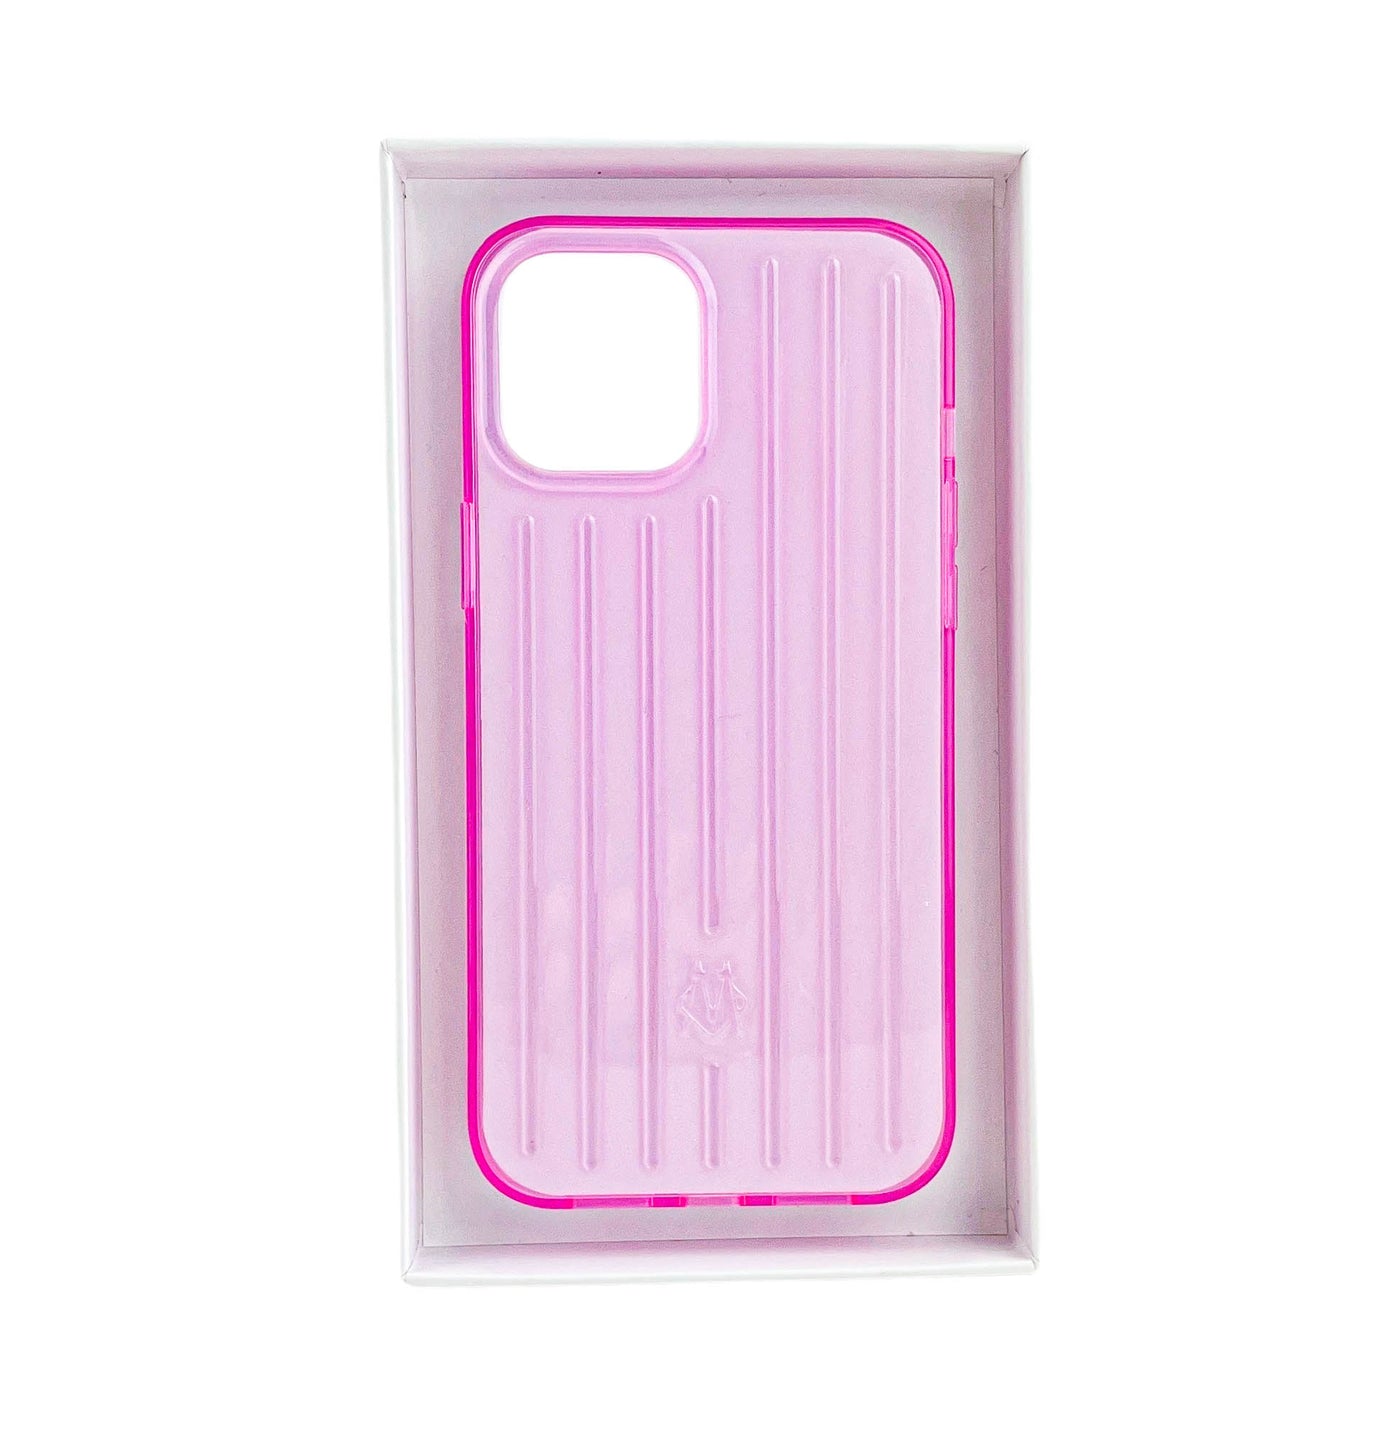 RIMOWA iPhone 12 Pro Max Phone Case in Fluorescent Pink - Discounts on RIMOWA at UAL